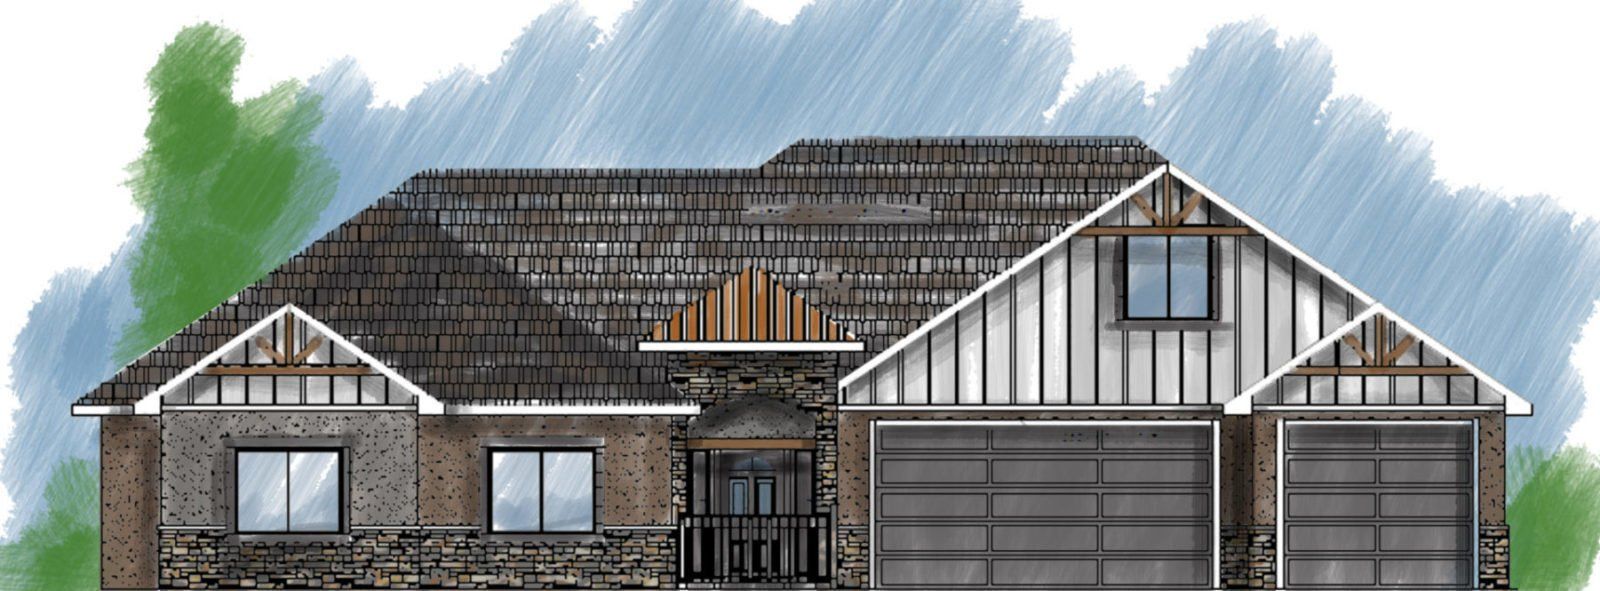 The Opalo Front Exterior Elevation | Integrity Homes | Grand Junction, CO 81501